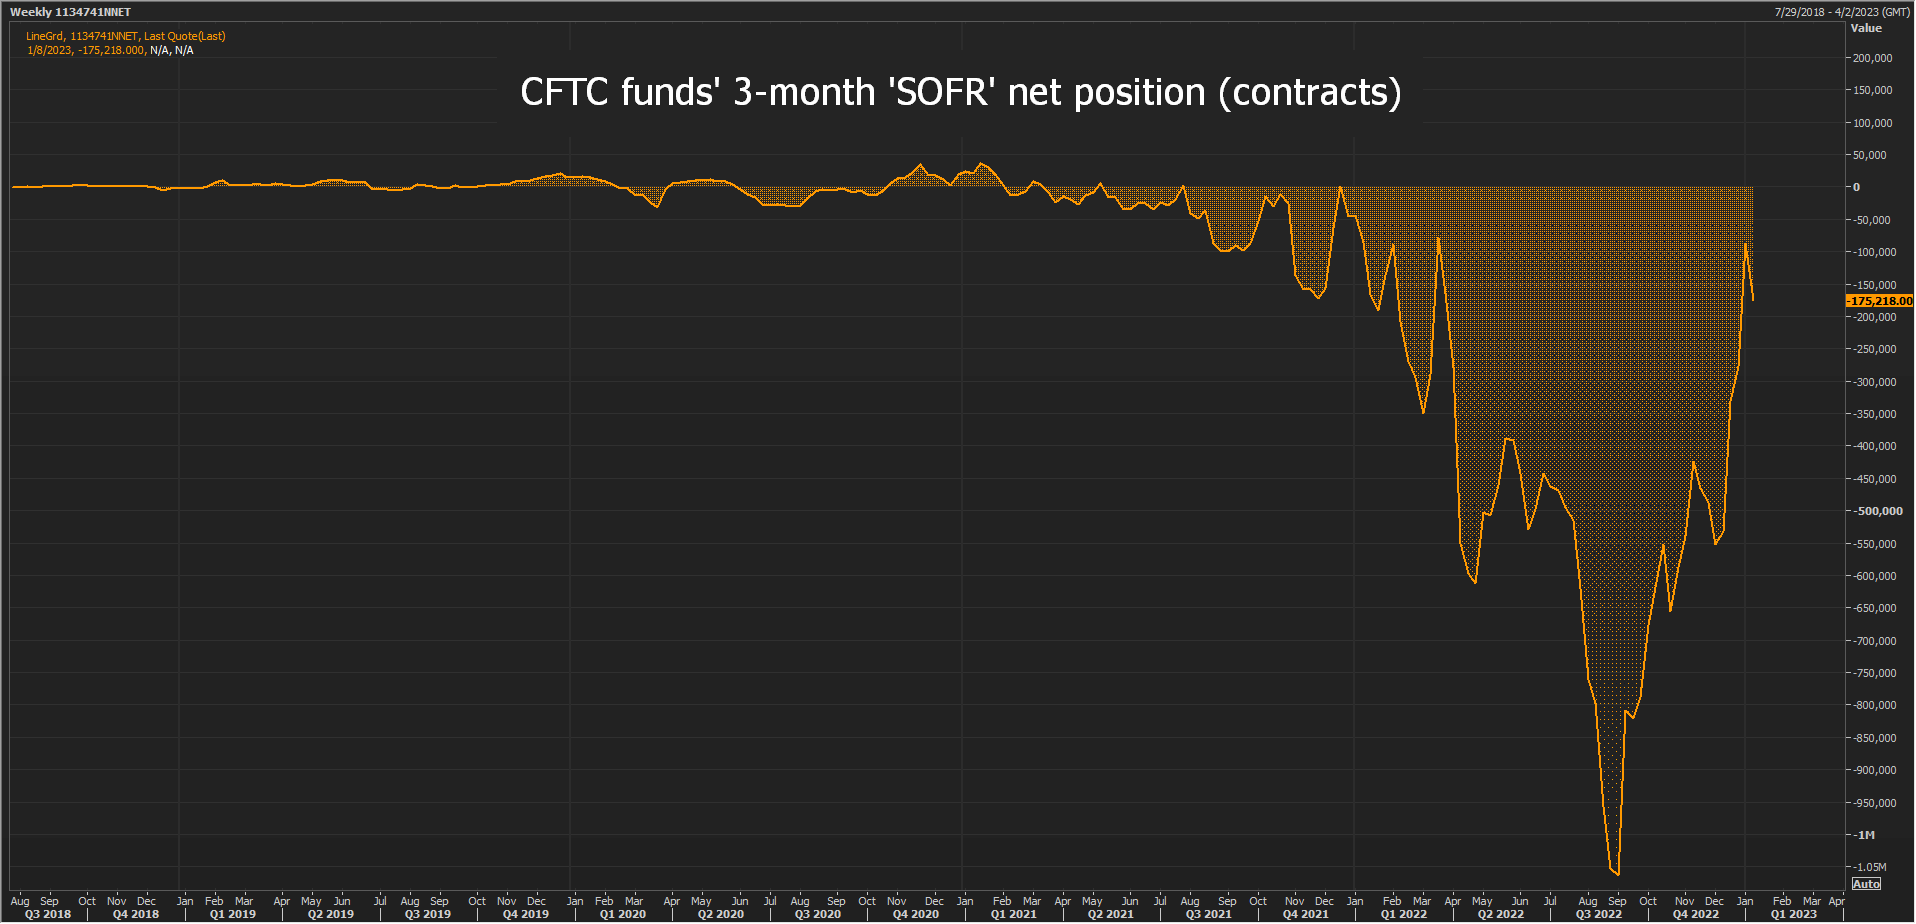 CFTC 3-month ‘SOFR’ position